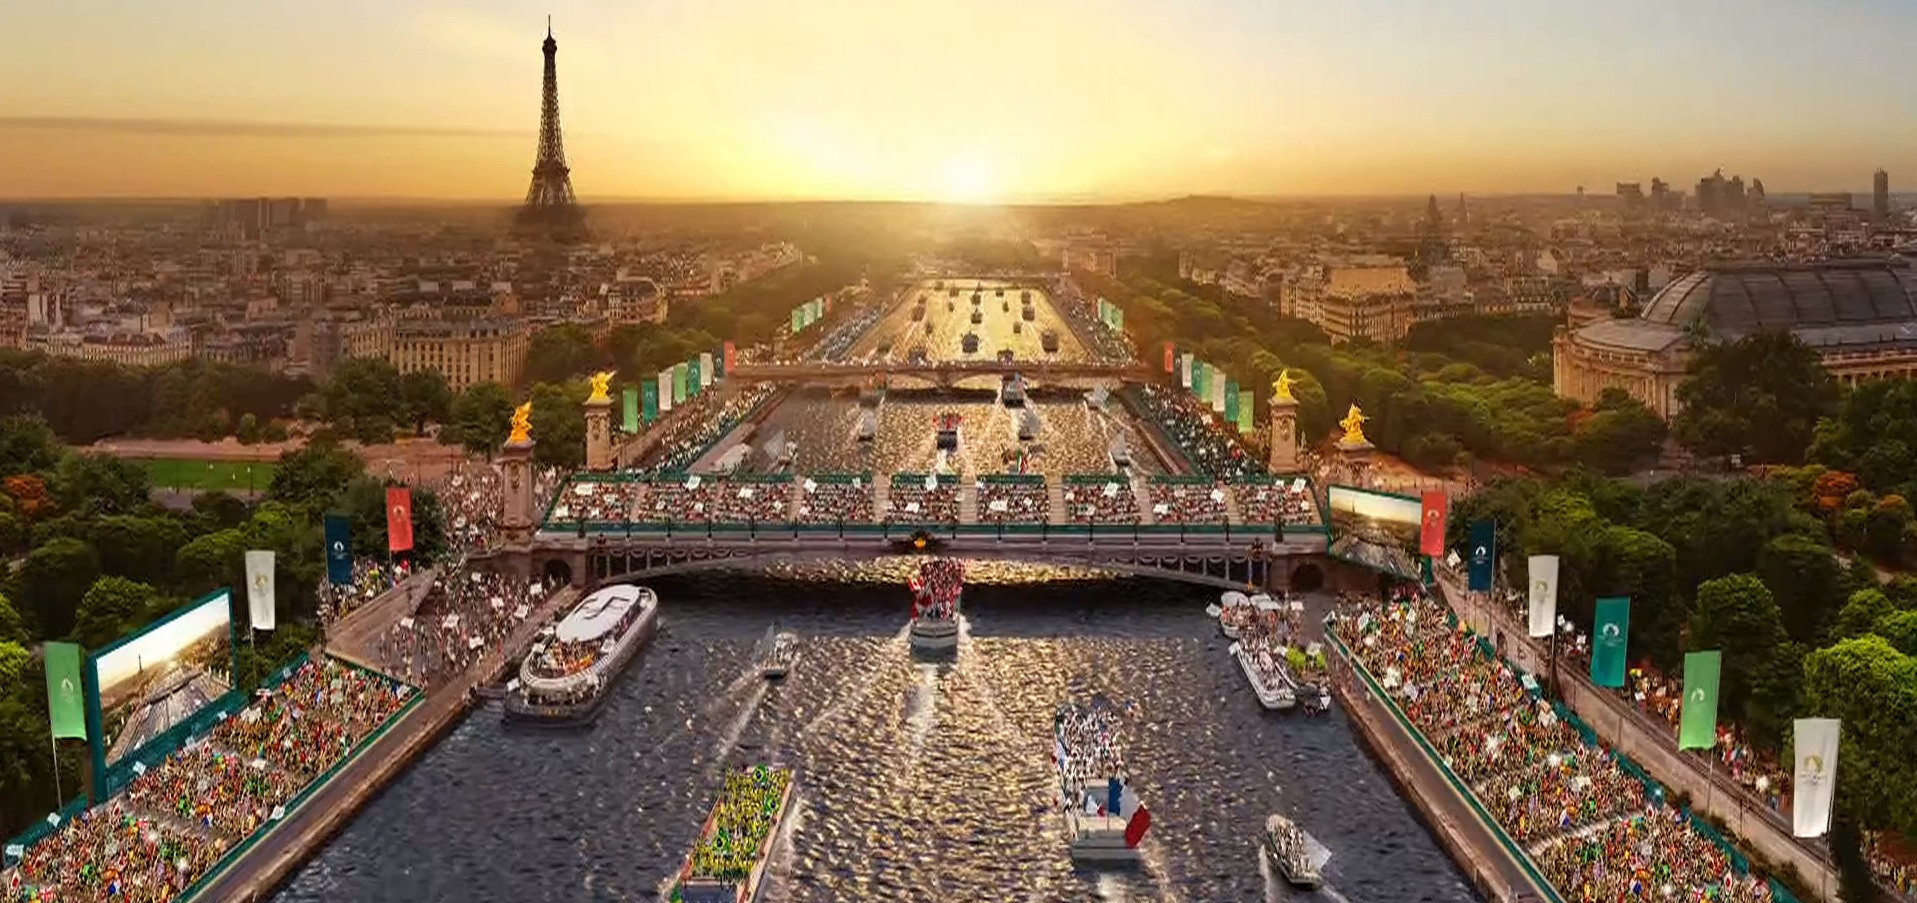 The Paris 2024 Opening Ceremony is due to be held on July 26 along the River Seine, with sport beginning two days prior ©Paris 2024